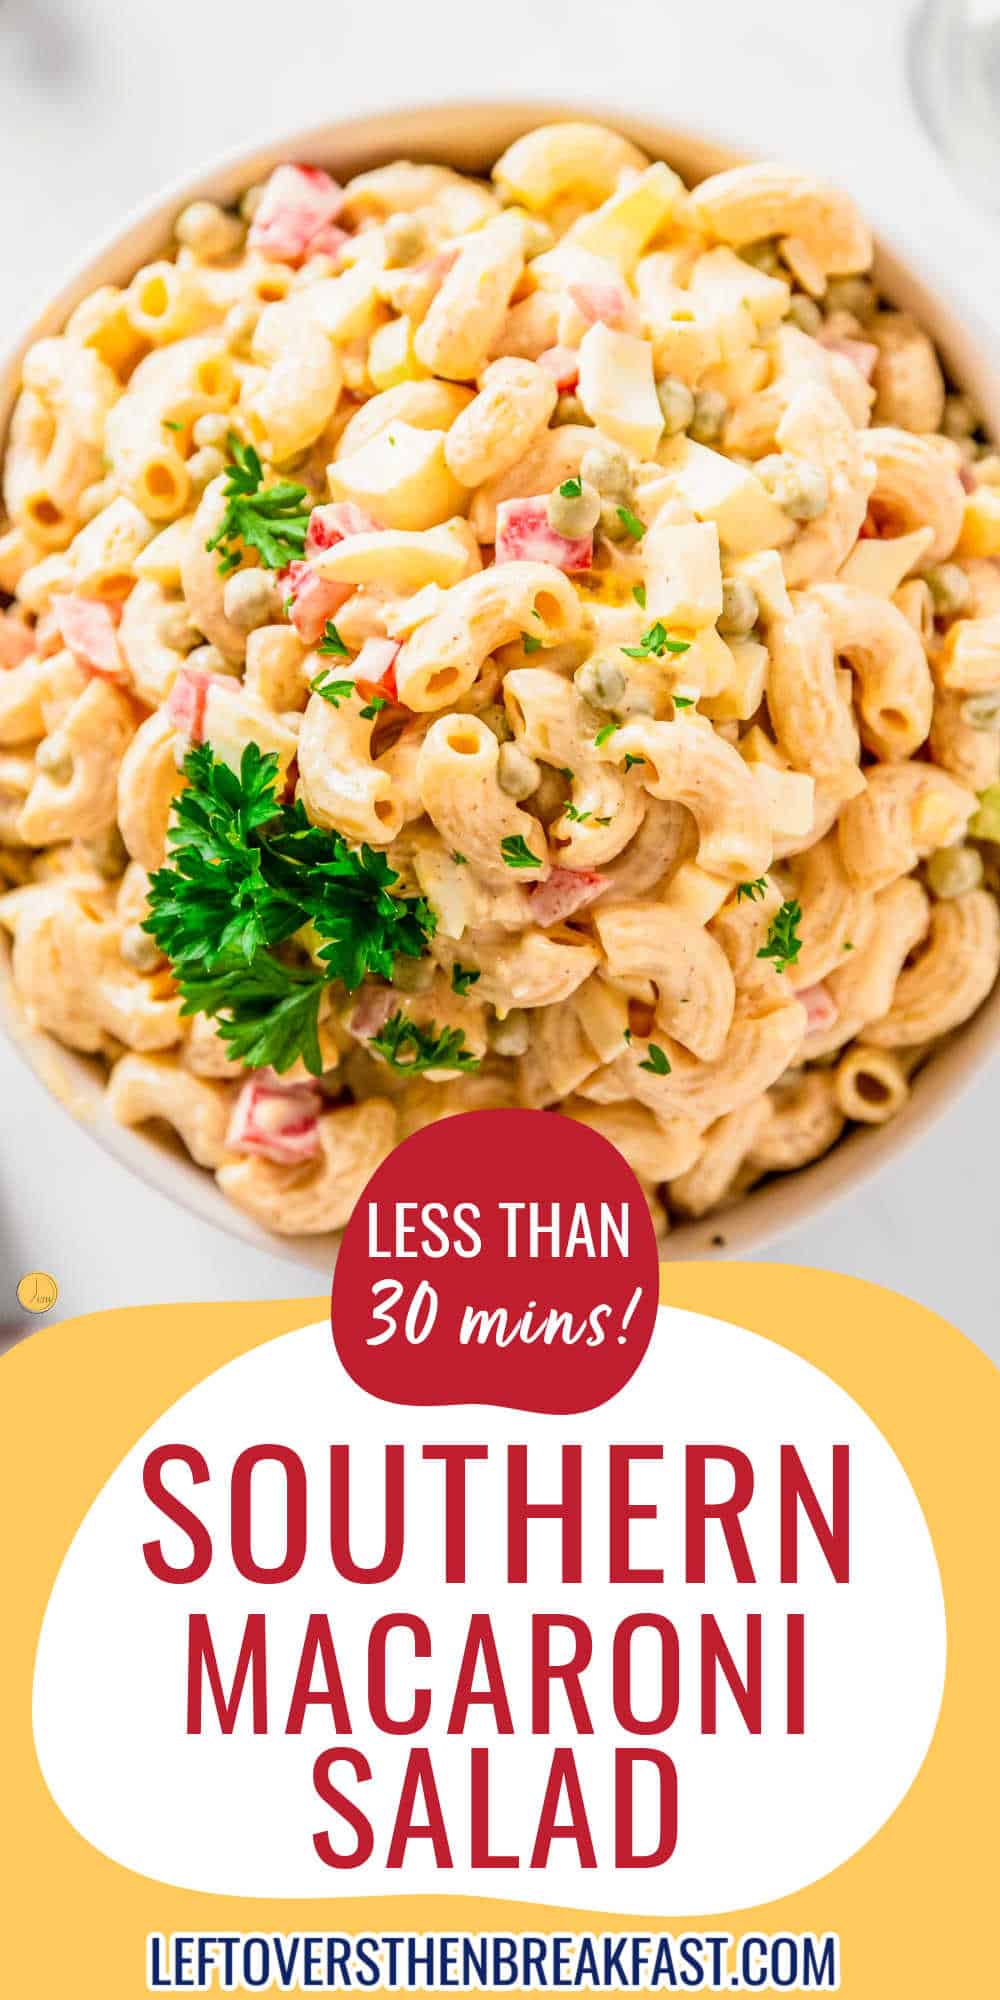 bowl of southern macaroni salad with yellow banner and red text